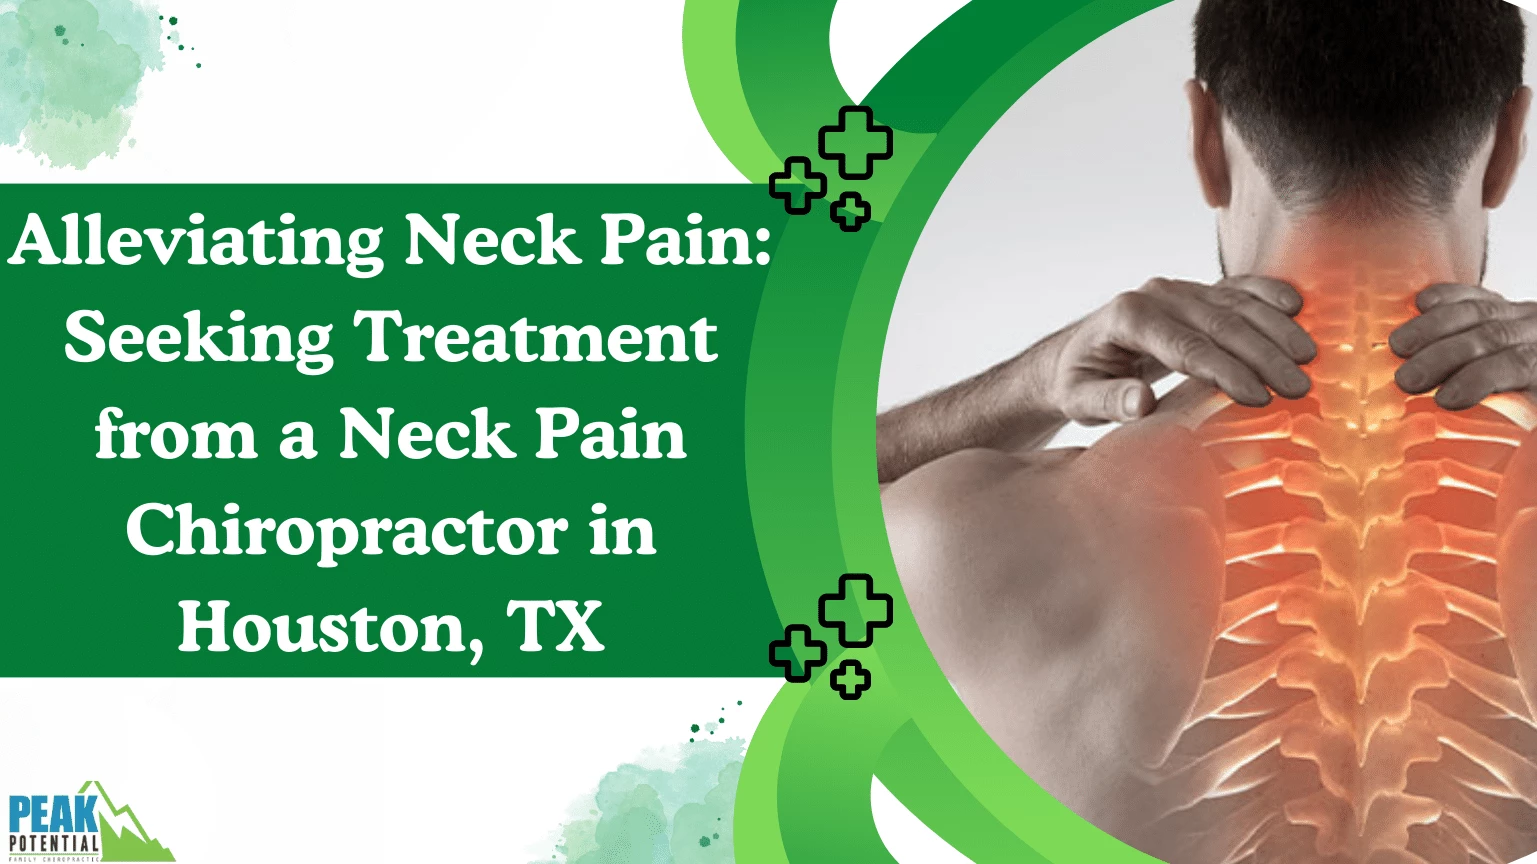 Alleviating Neck Pain Seeking Treatment from a Neck Pain Chiropractor in Houston, TX